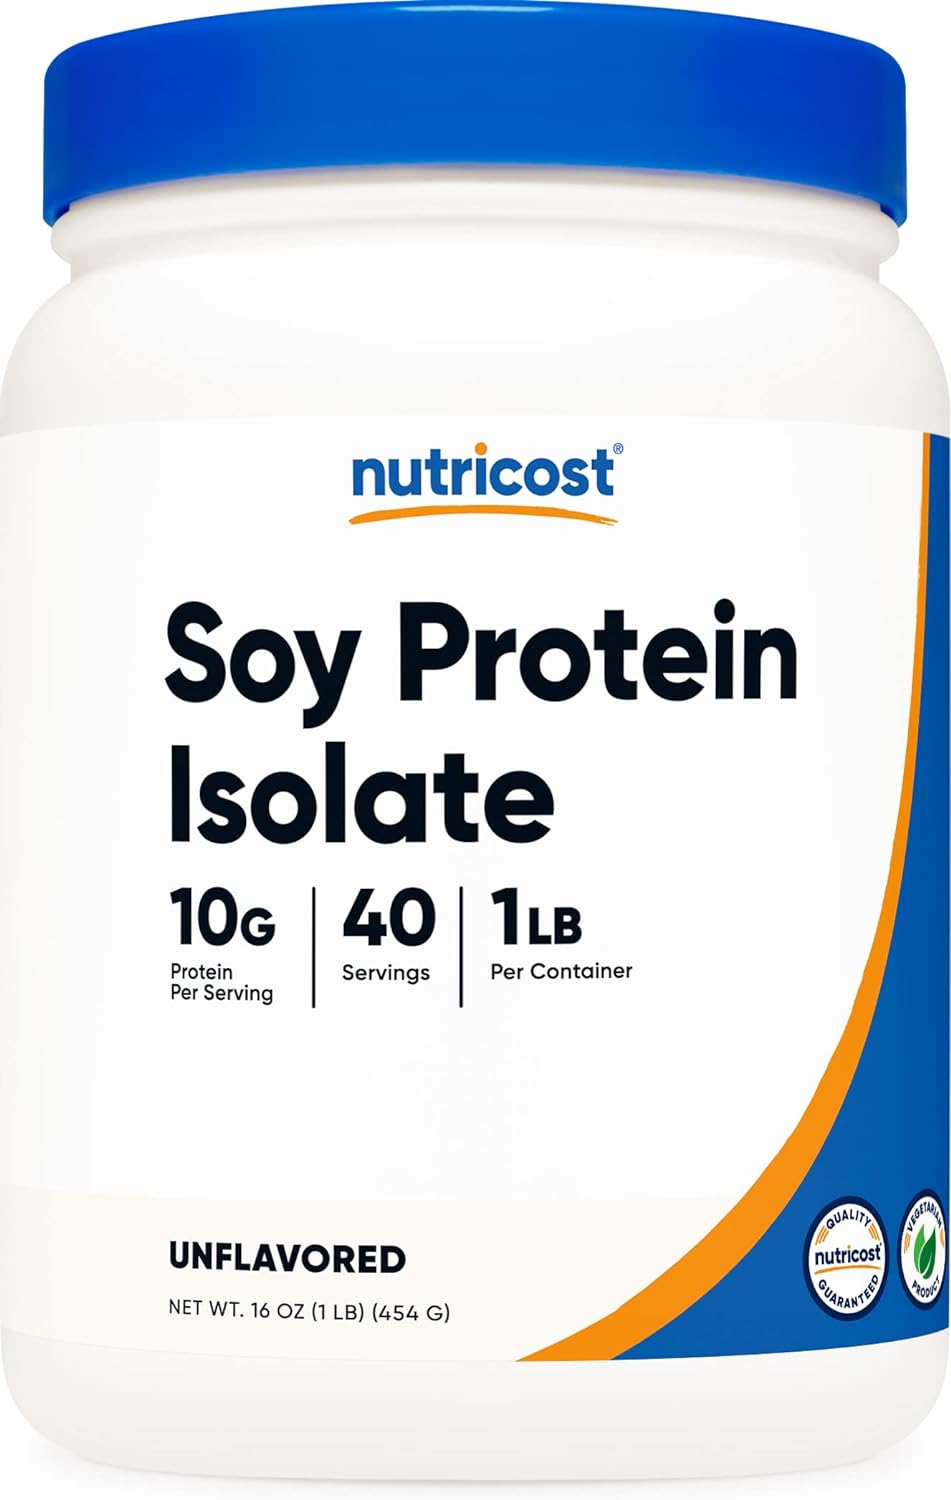 Nutricost Soy Protein Powder, 1 LB Unflavored, 10 Grams of Protein Per Serving, Vegetarian, Non-GMO & Gluten Free